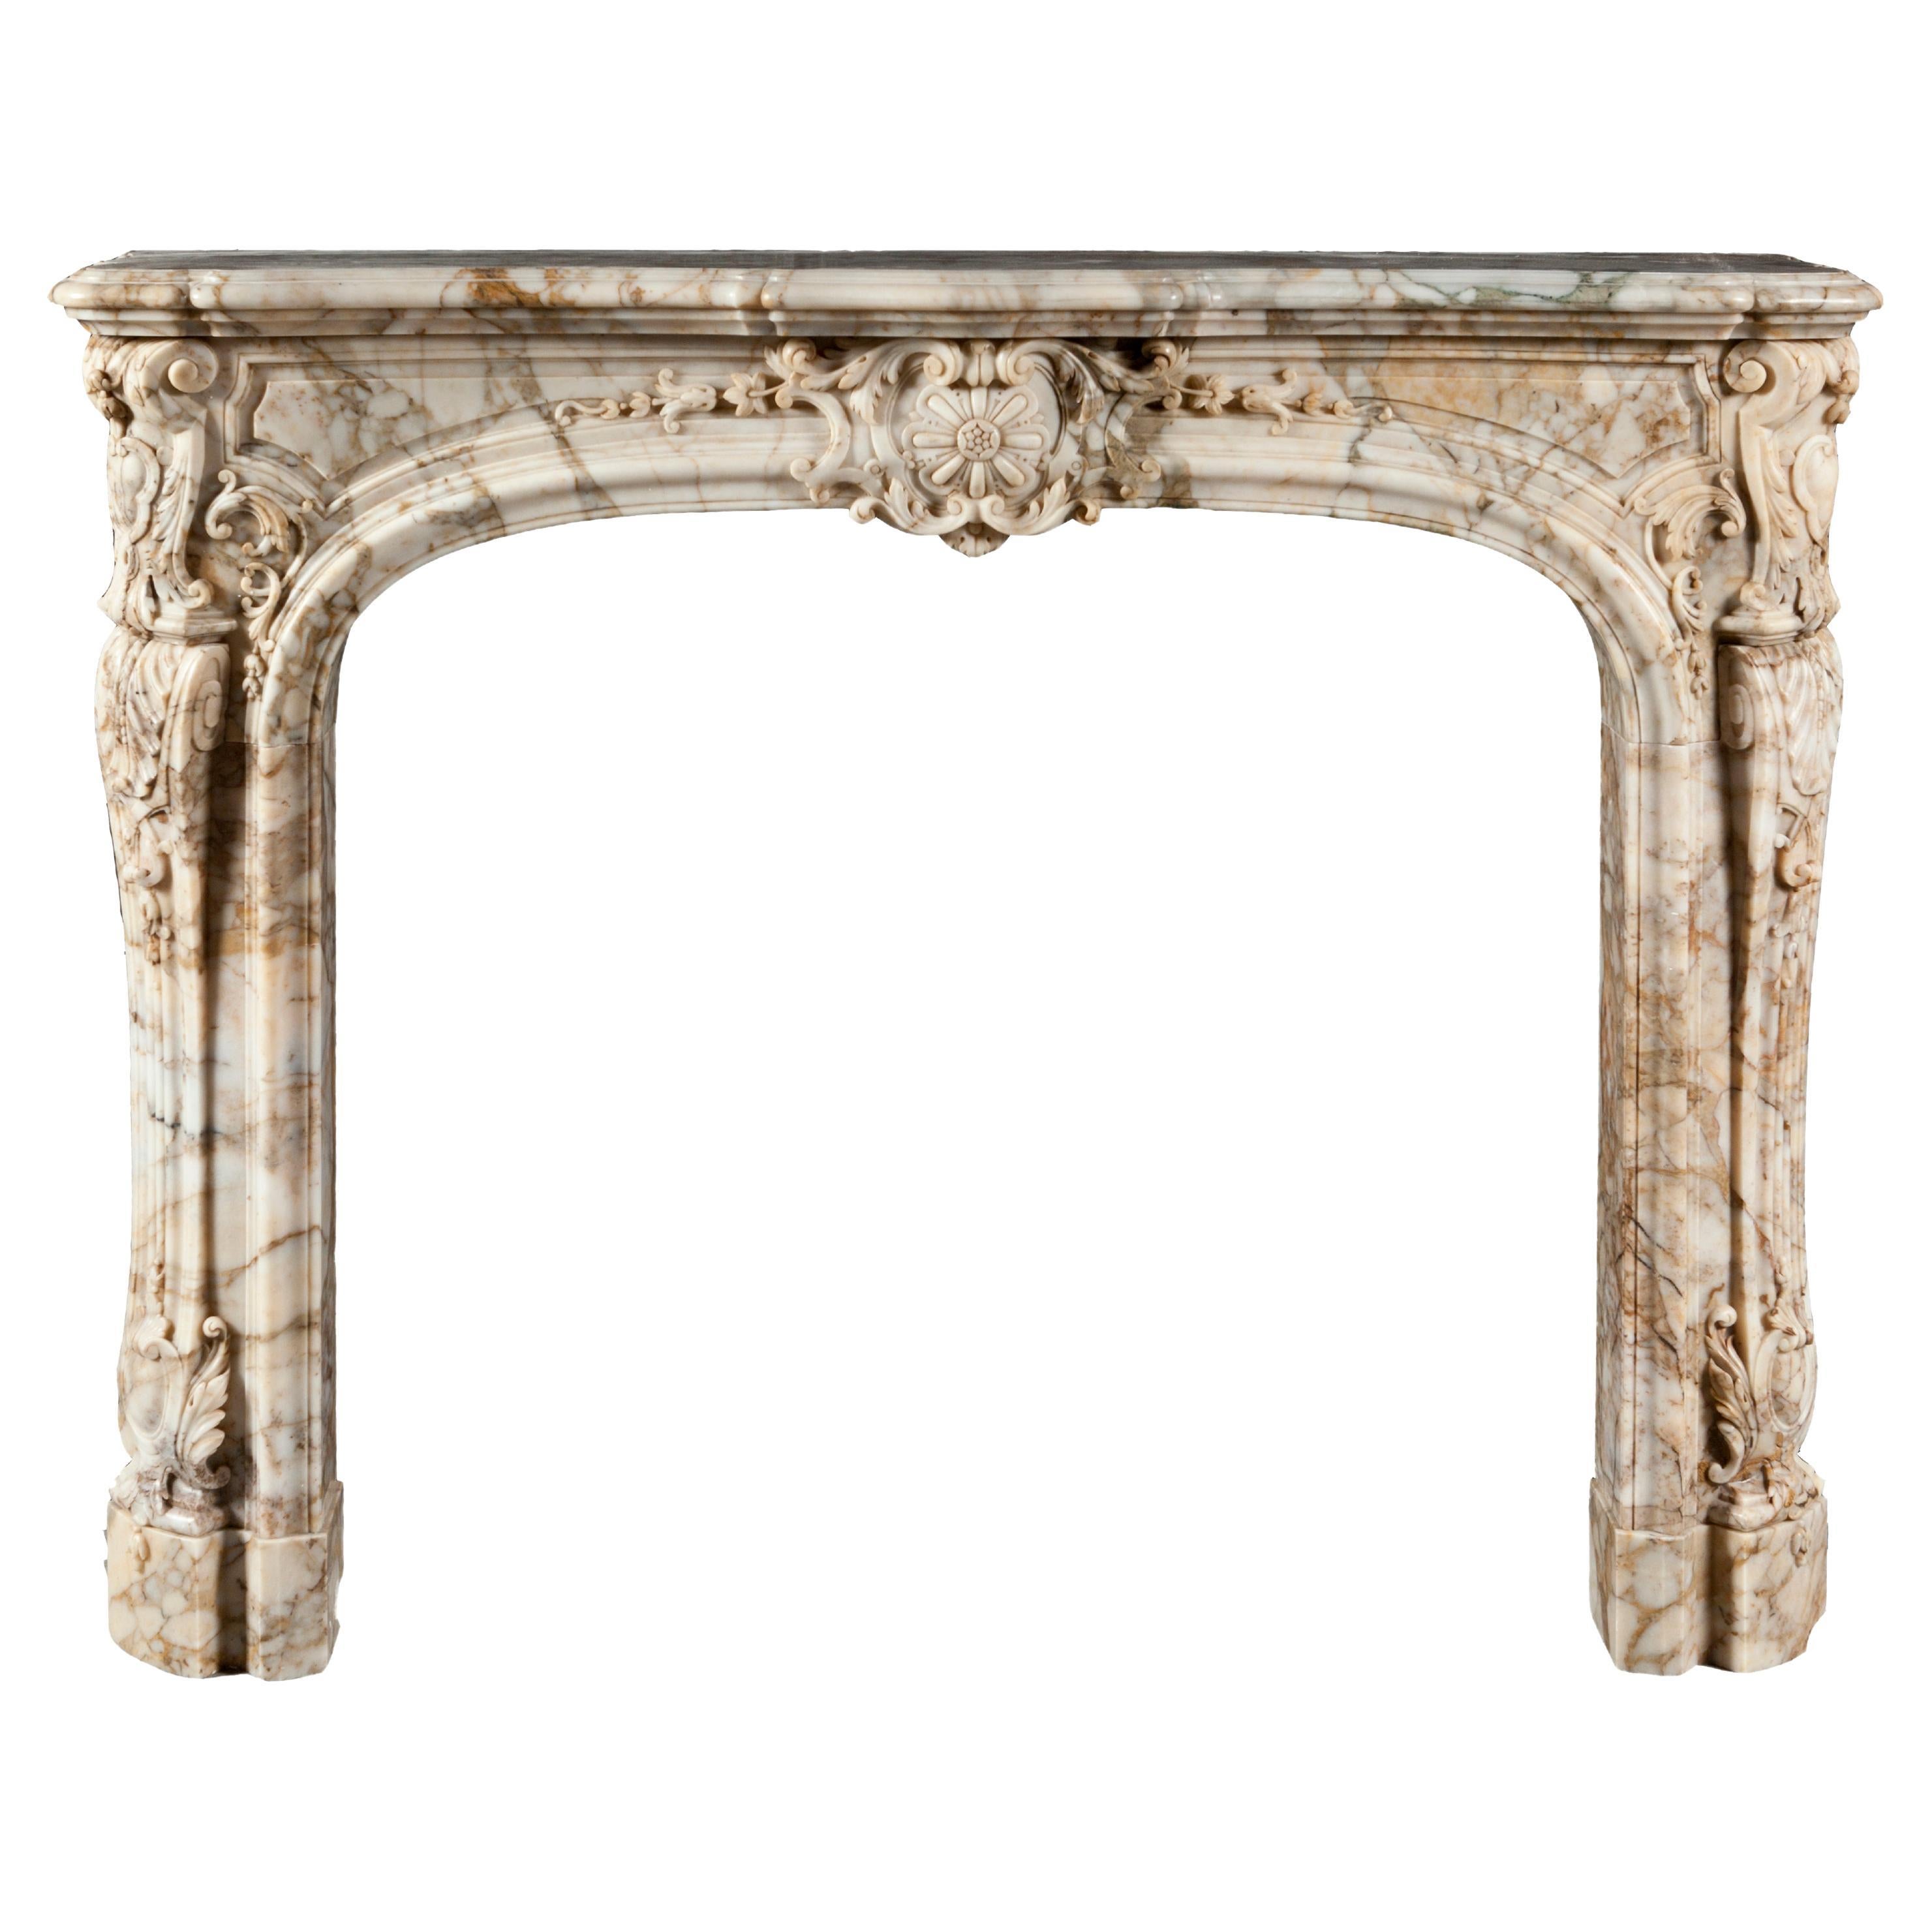 Fine quality French Regency style small marble fireplace For Sale